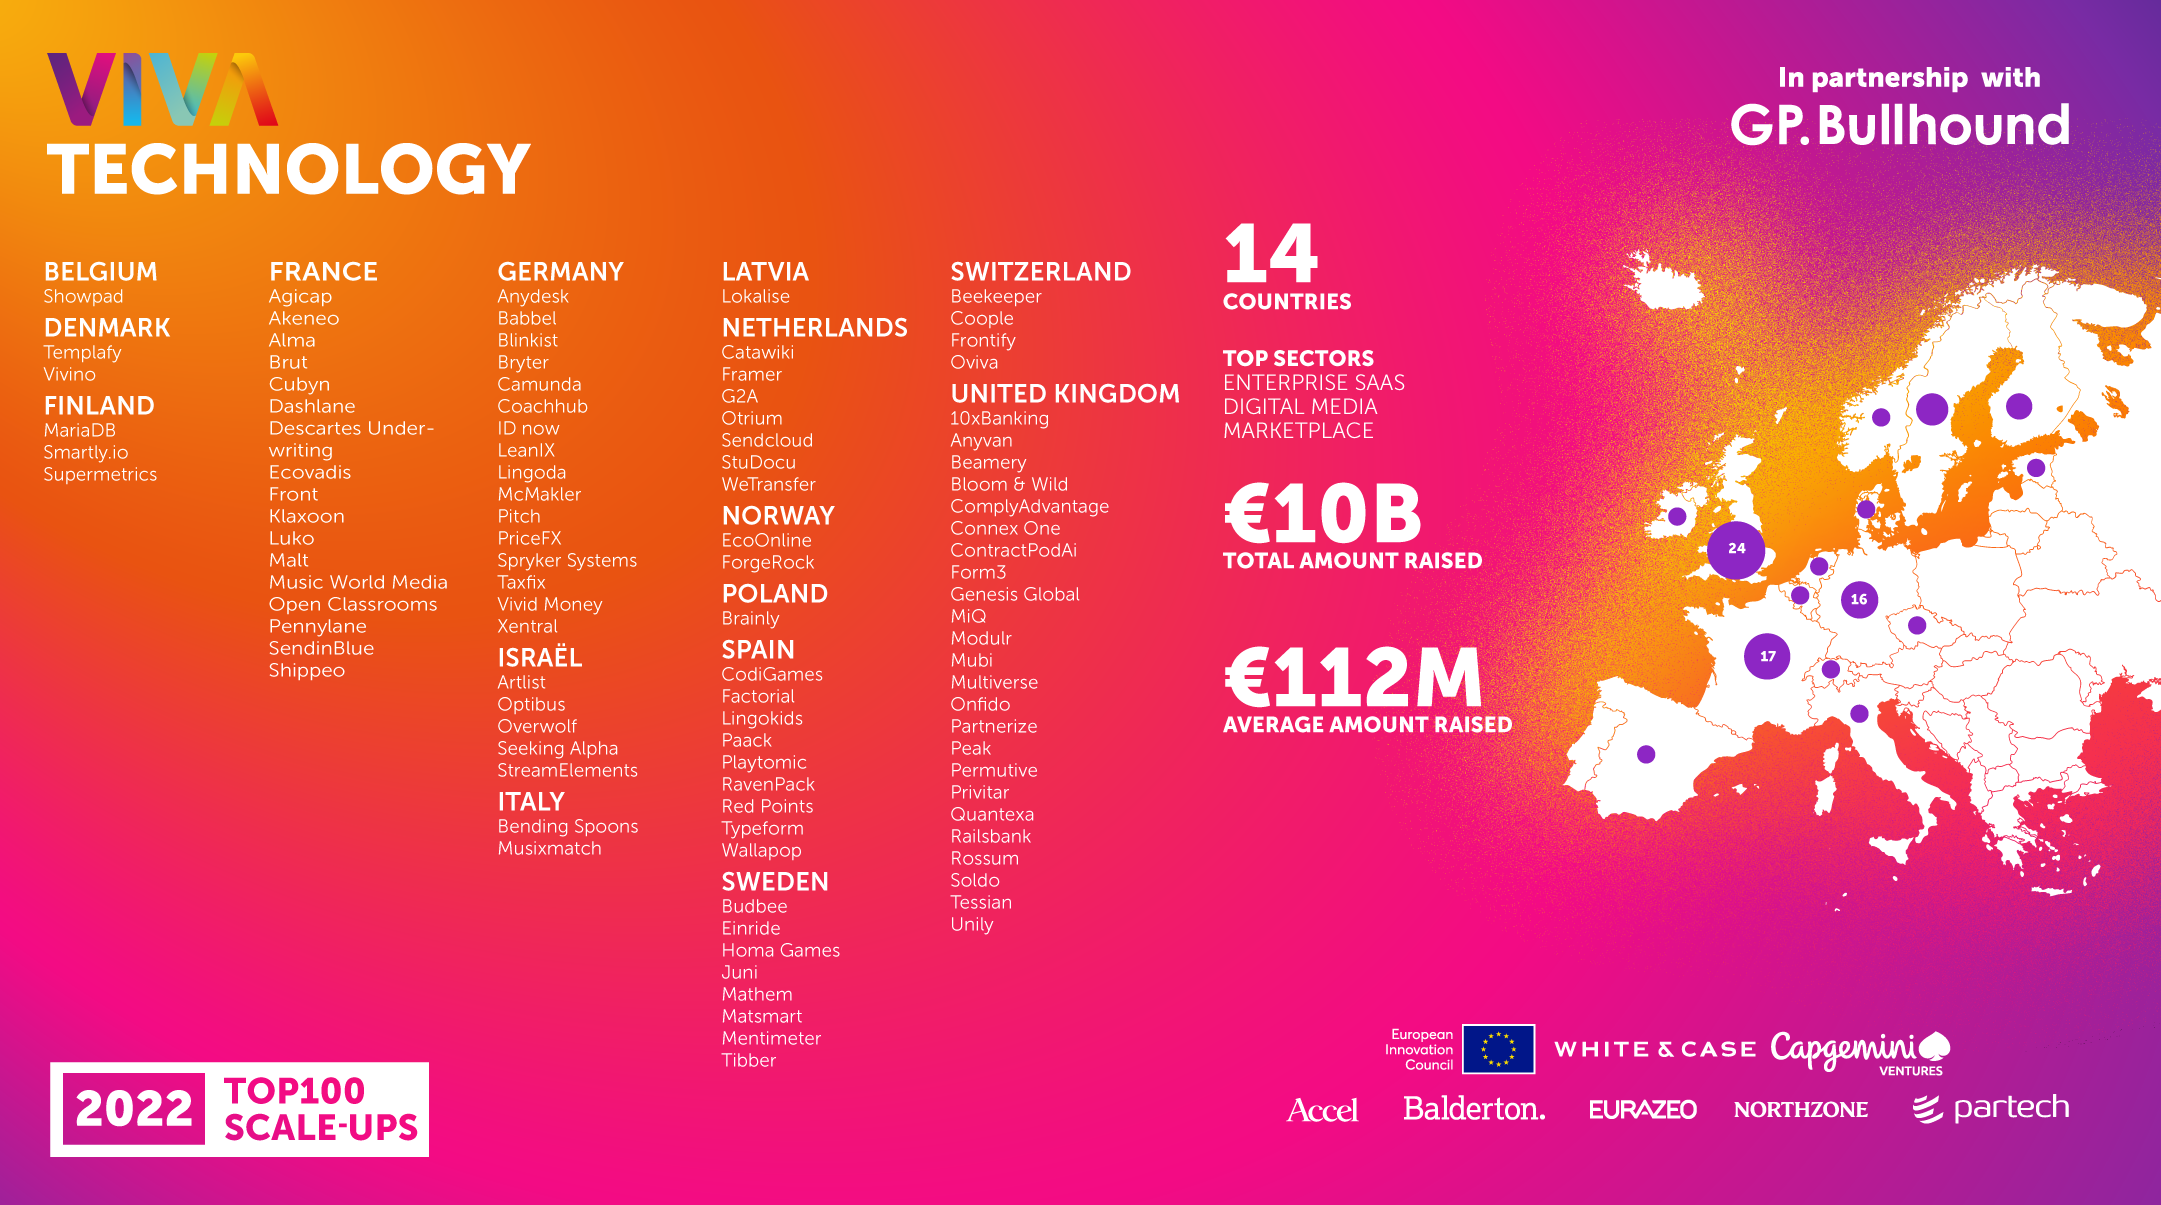 List of Top 100 Unicorns from VivaTech